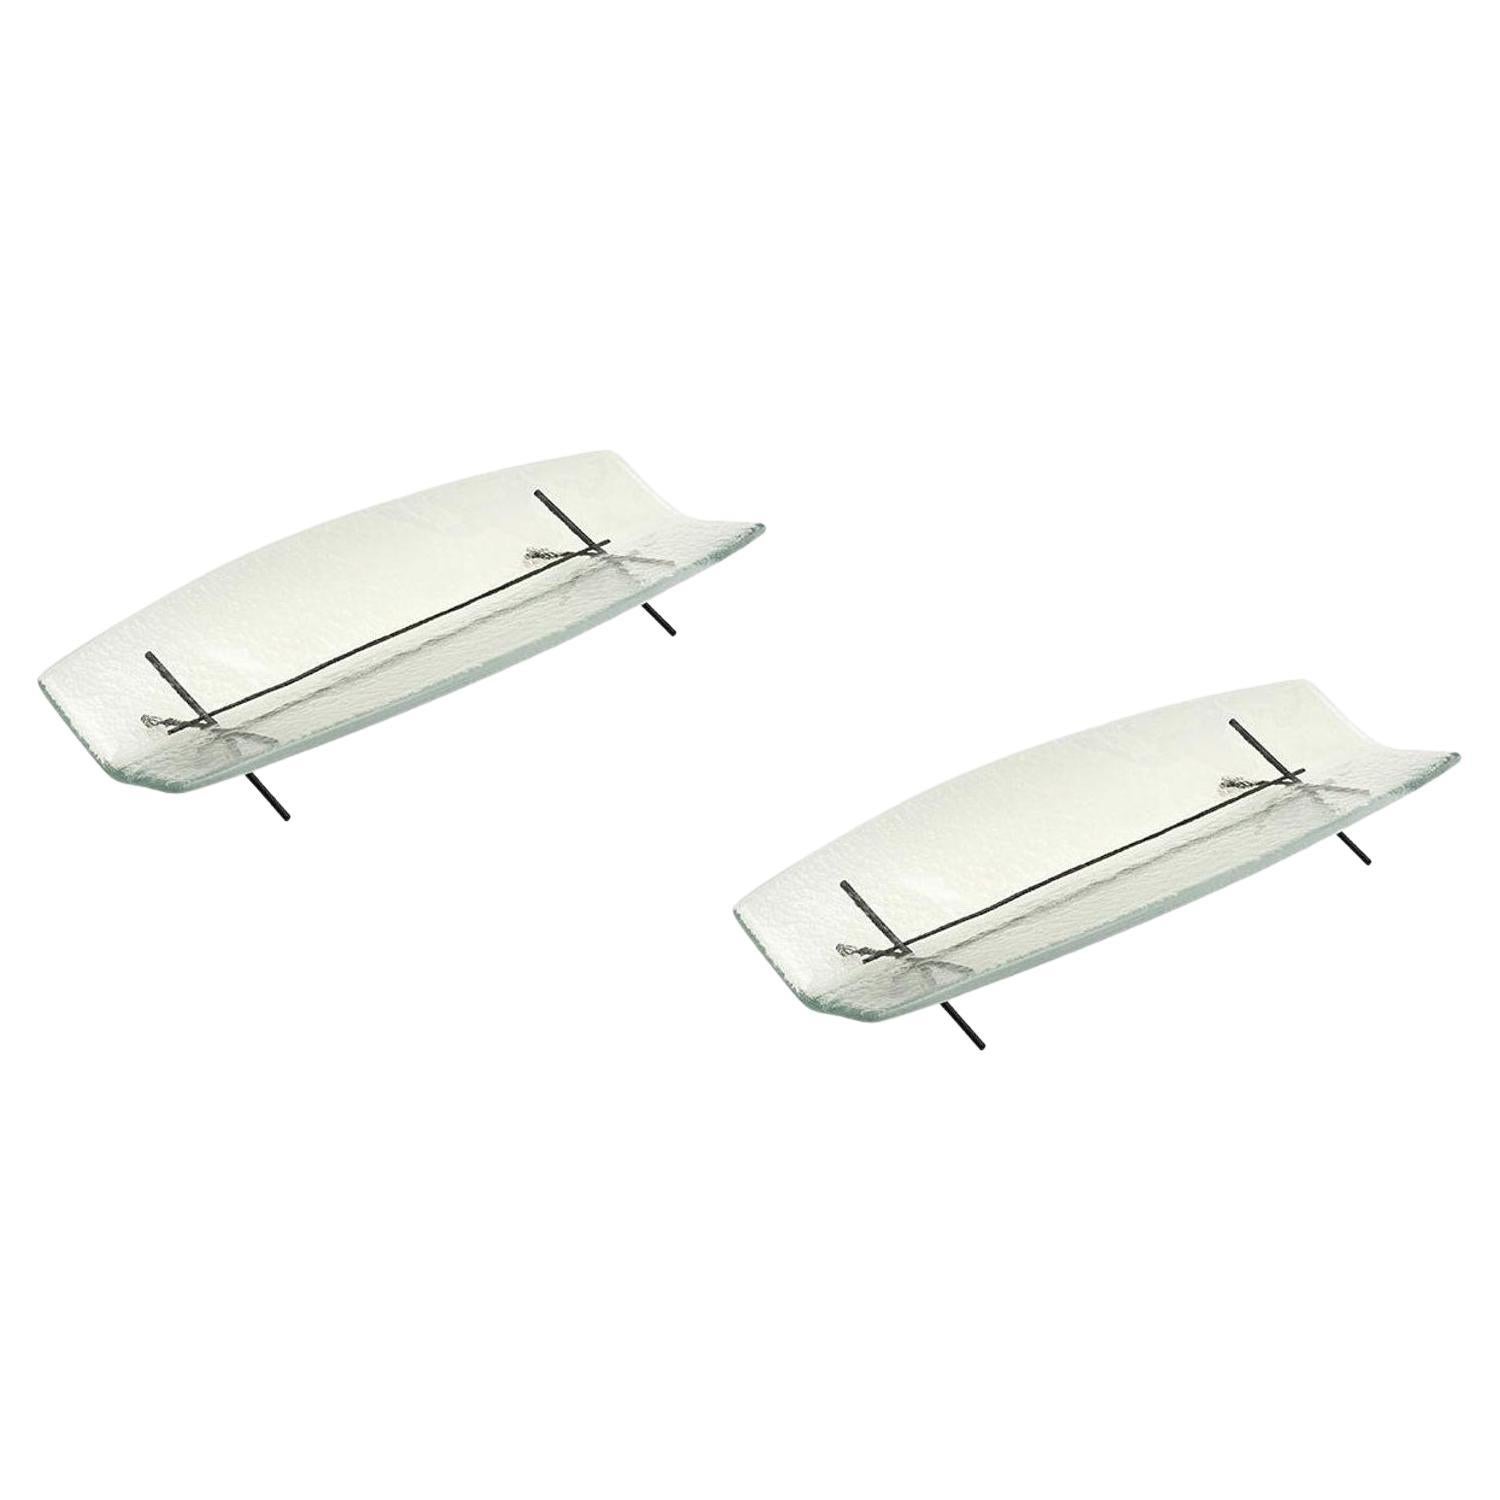 Set of 2 Hakou D Trays by Mason Editions For Sale